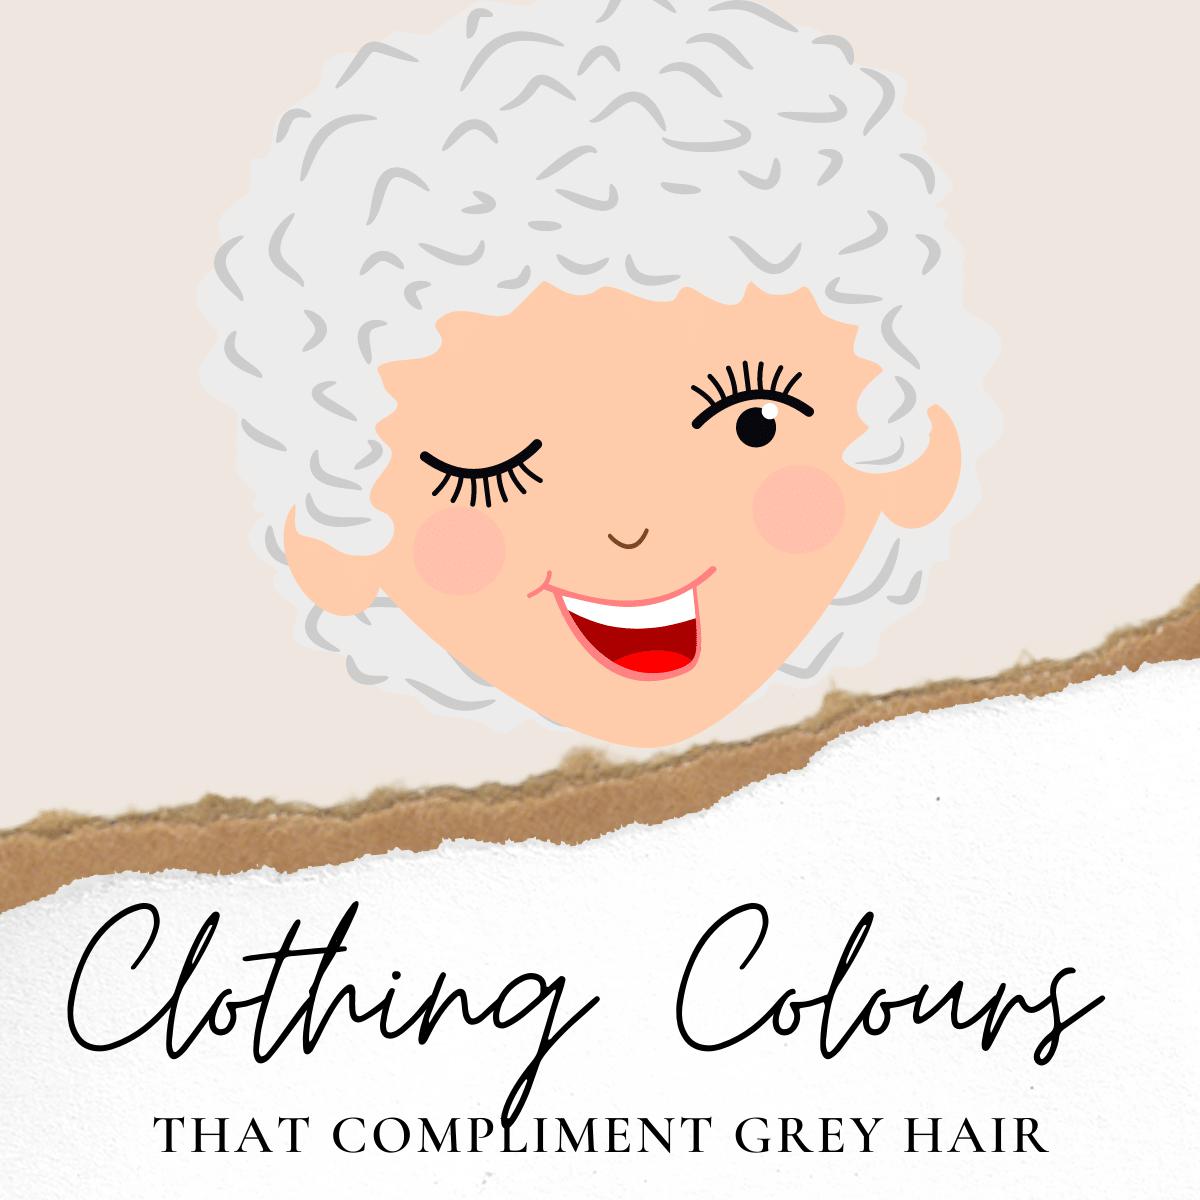 Clothing colours that compliment grey hair